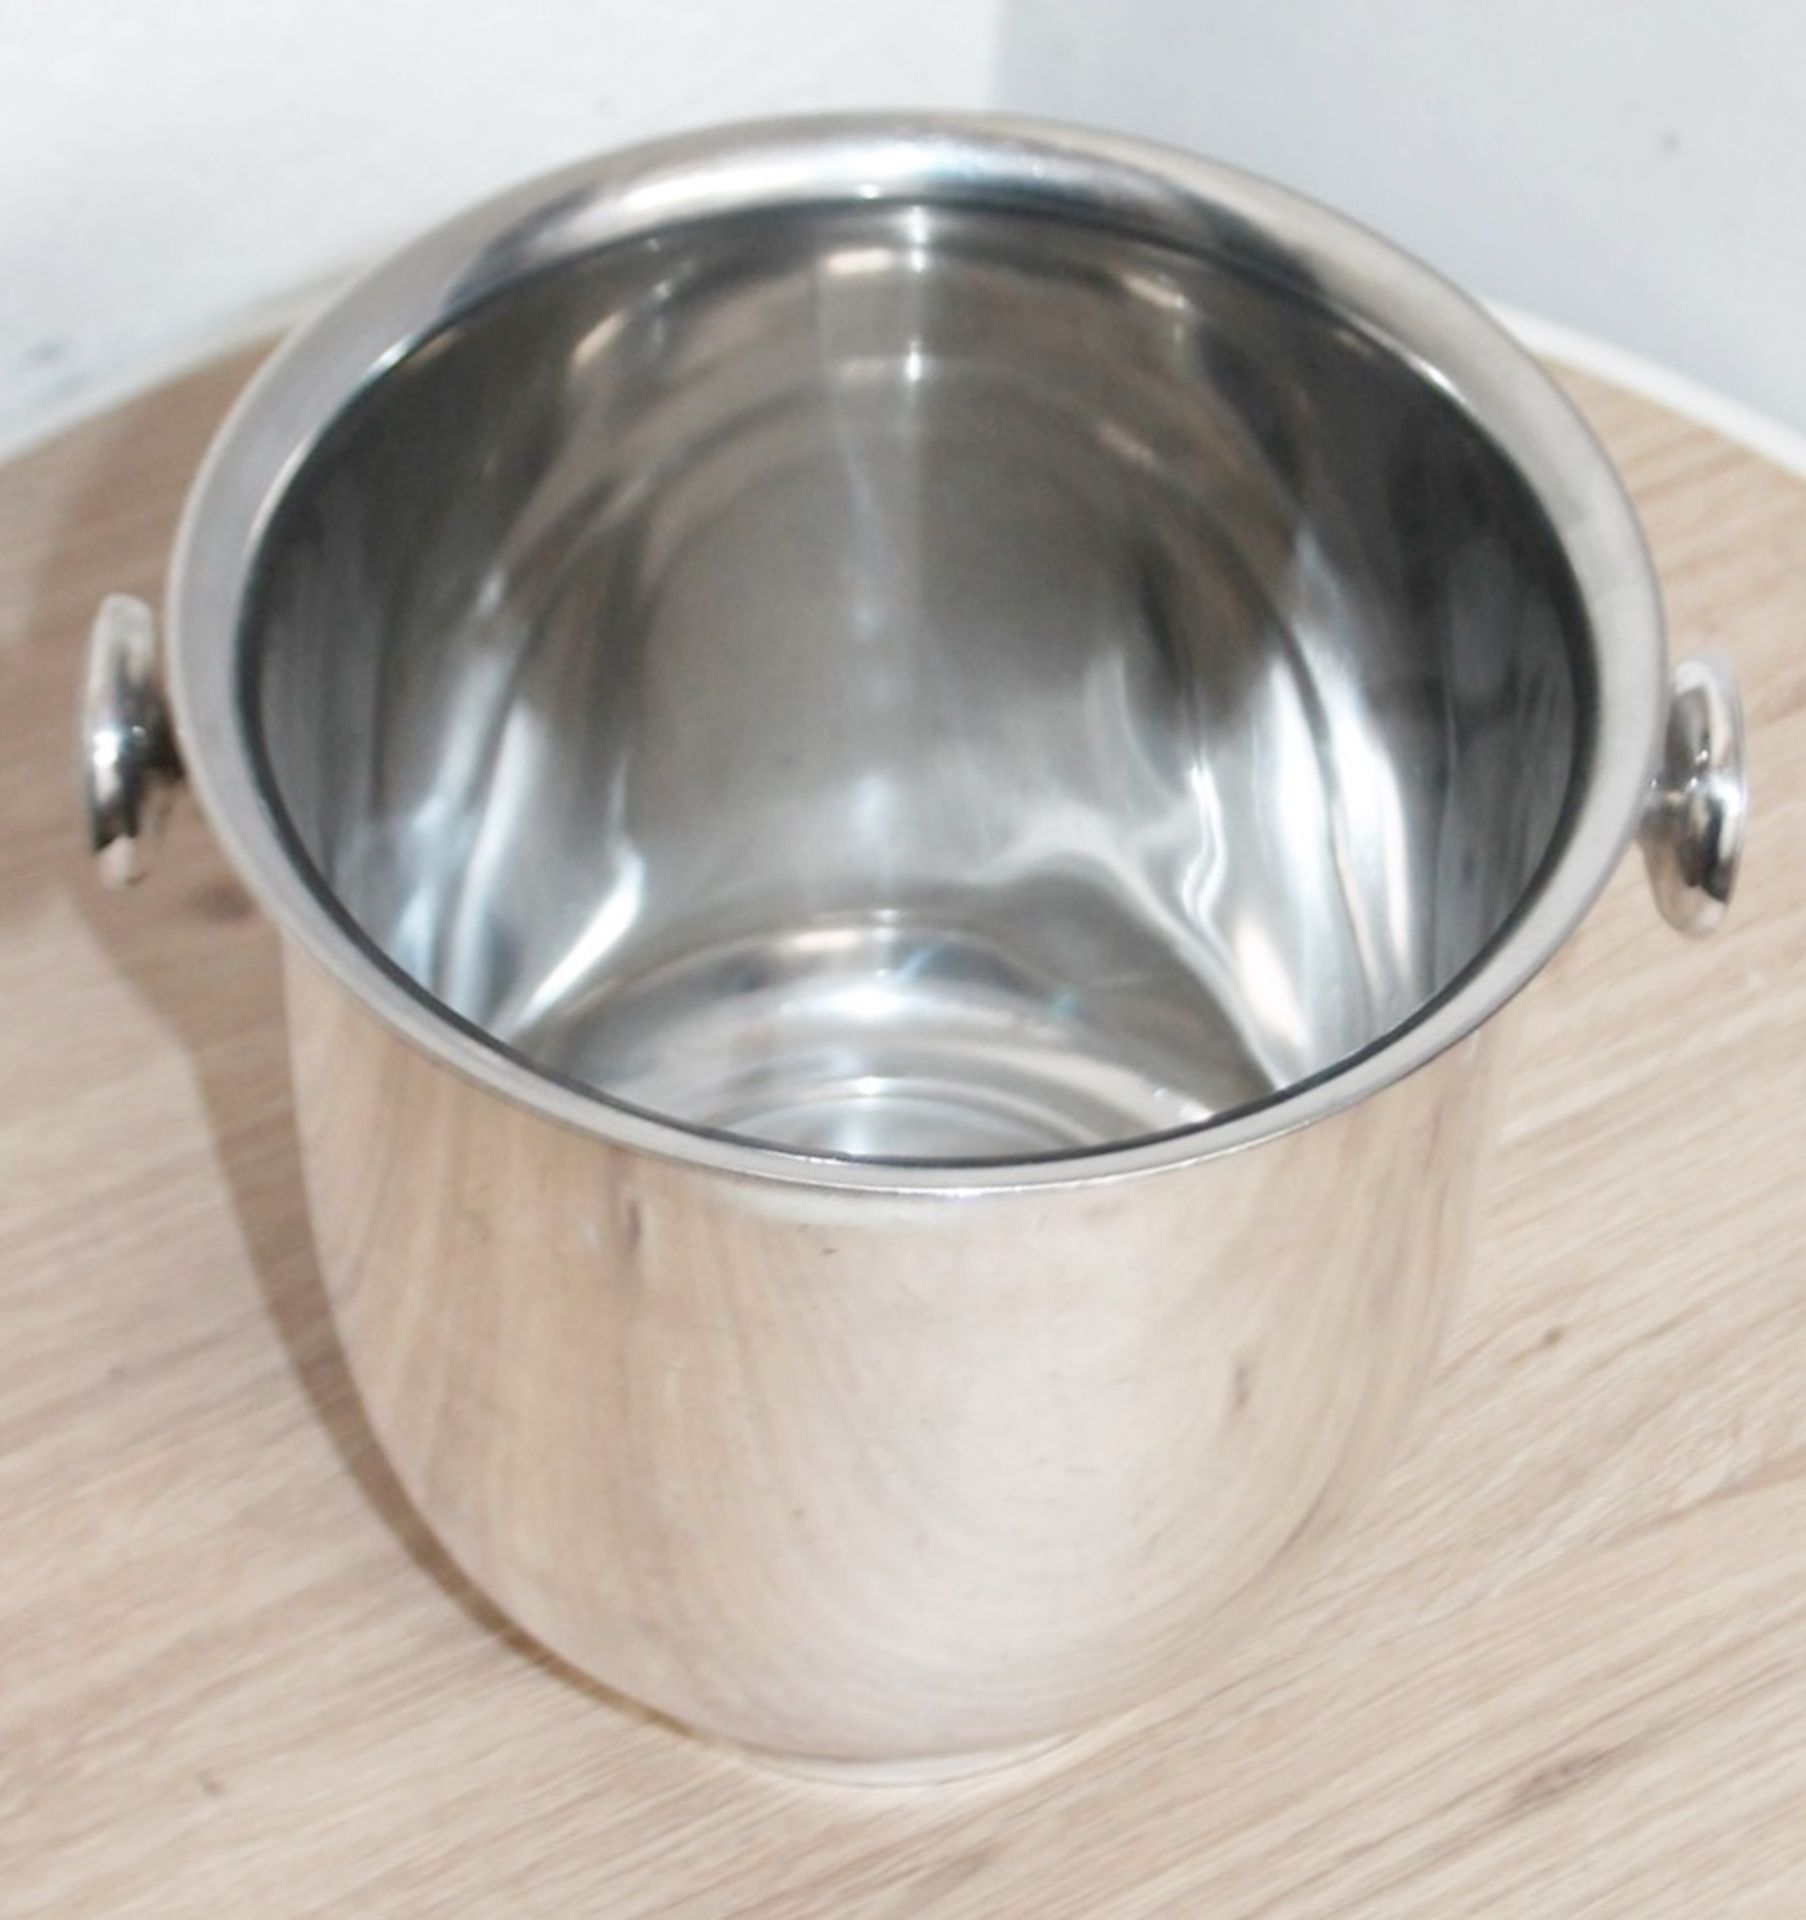 1 x SAMBONET Elite Ice Bucket with Handles - Stainless Steel - Current RRP £148.00 - Recently - Image 4 of 4